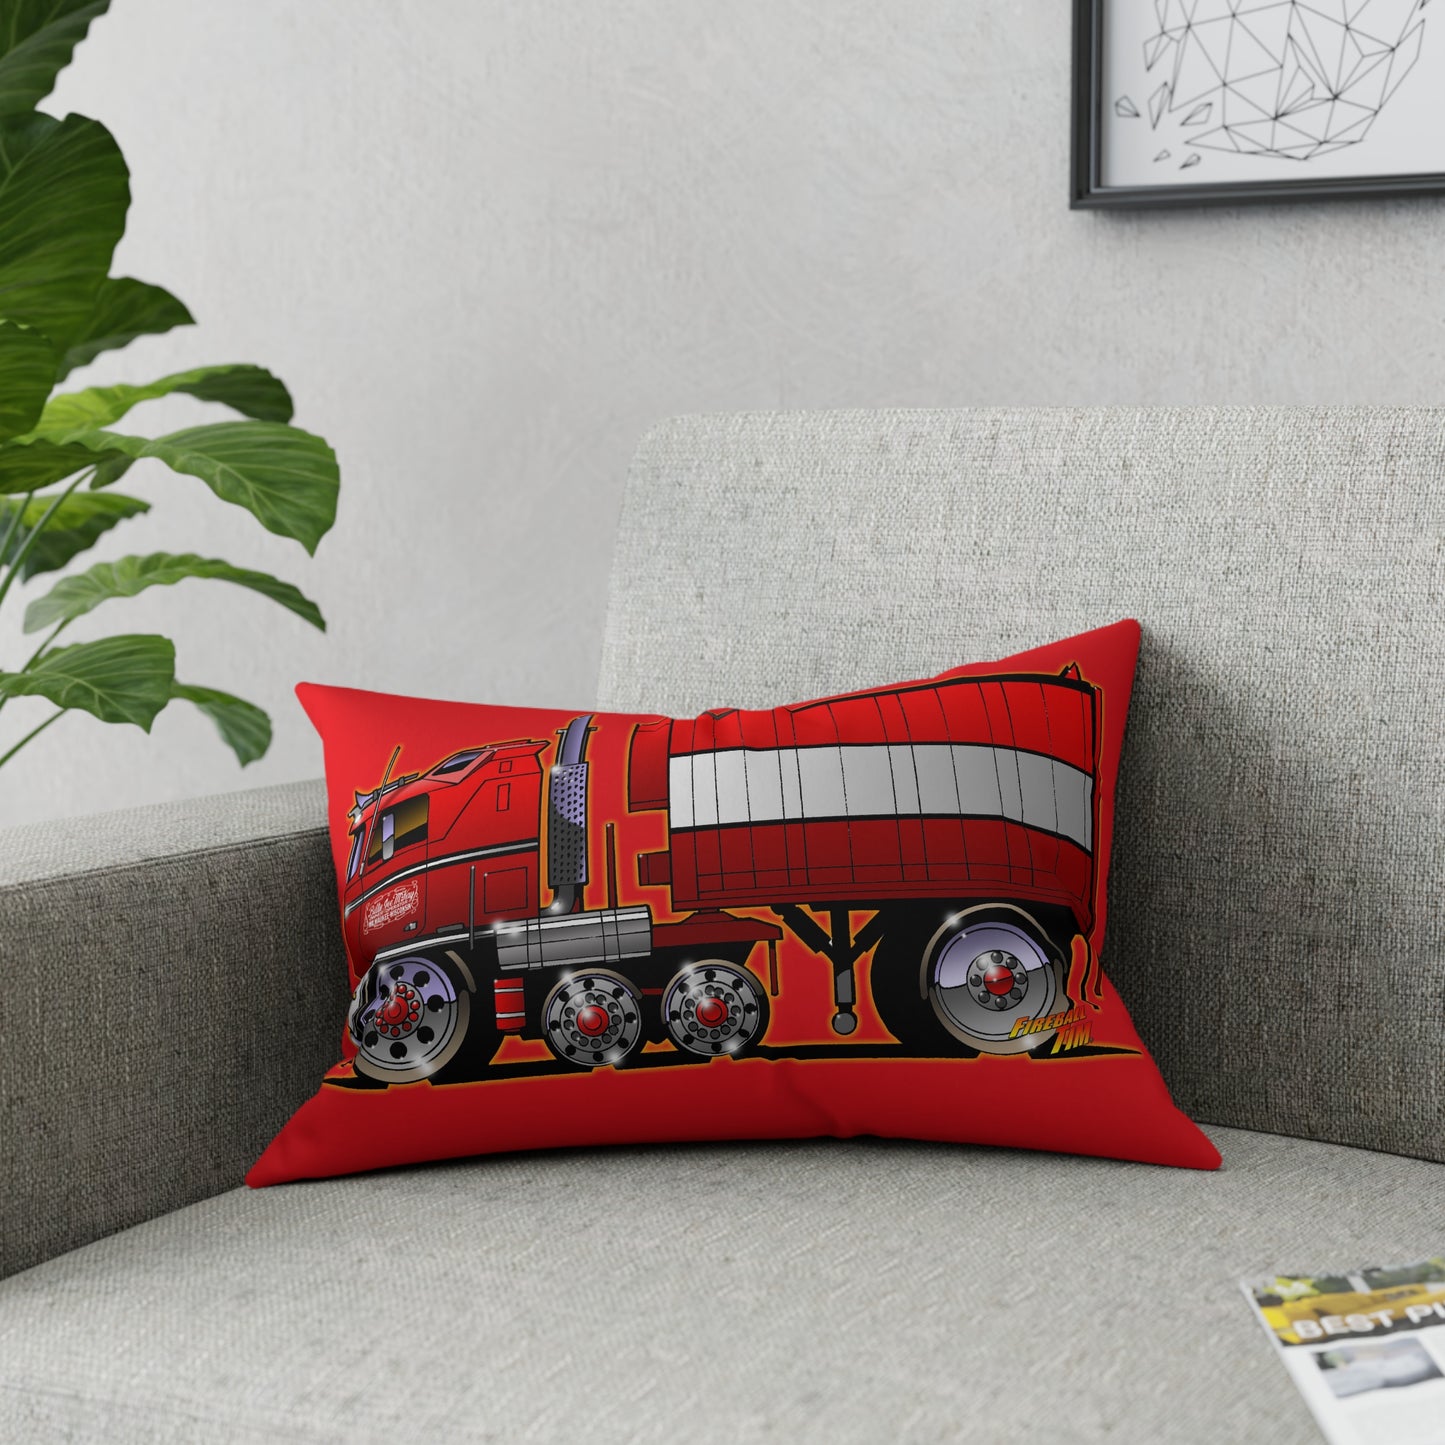 BJ AND THE BEAR Semi Truck Broadcloth Pillow 5 Sizes